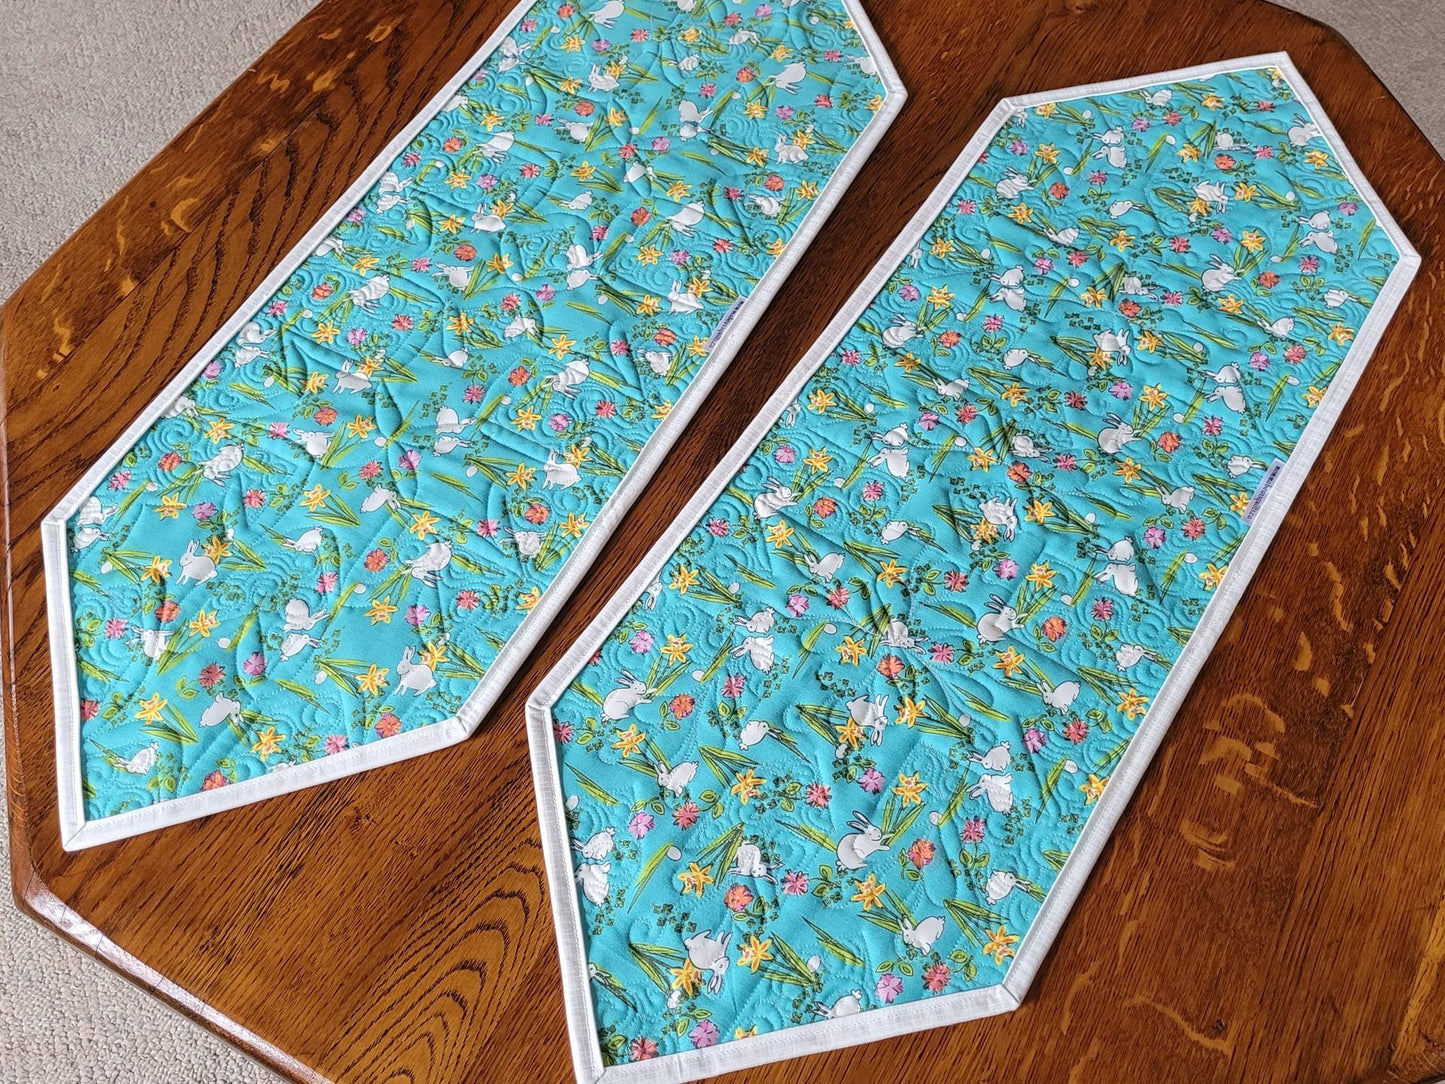 back of table runner has teal blue cotton print with white bunnies and daffodils